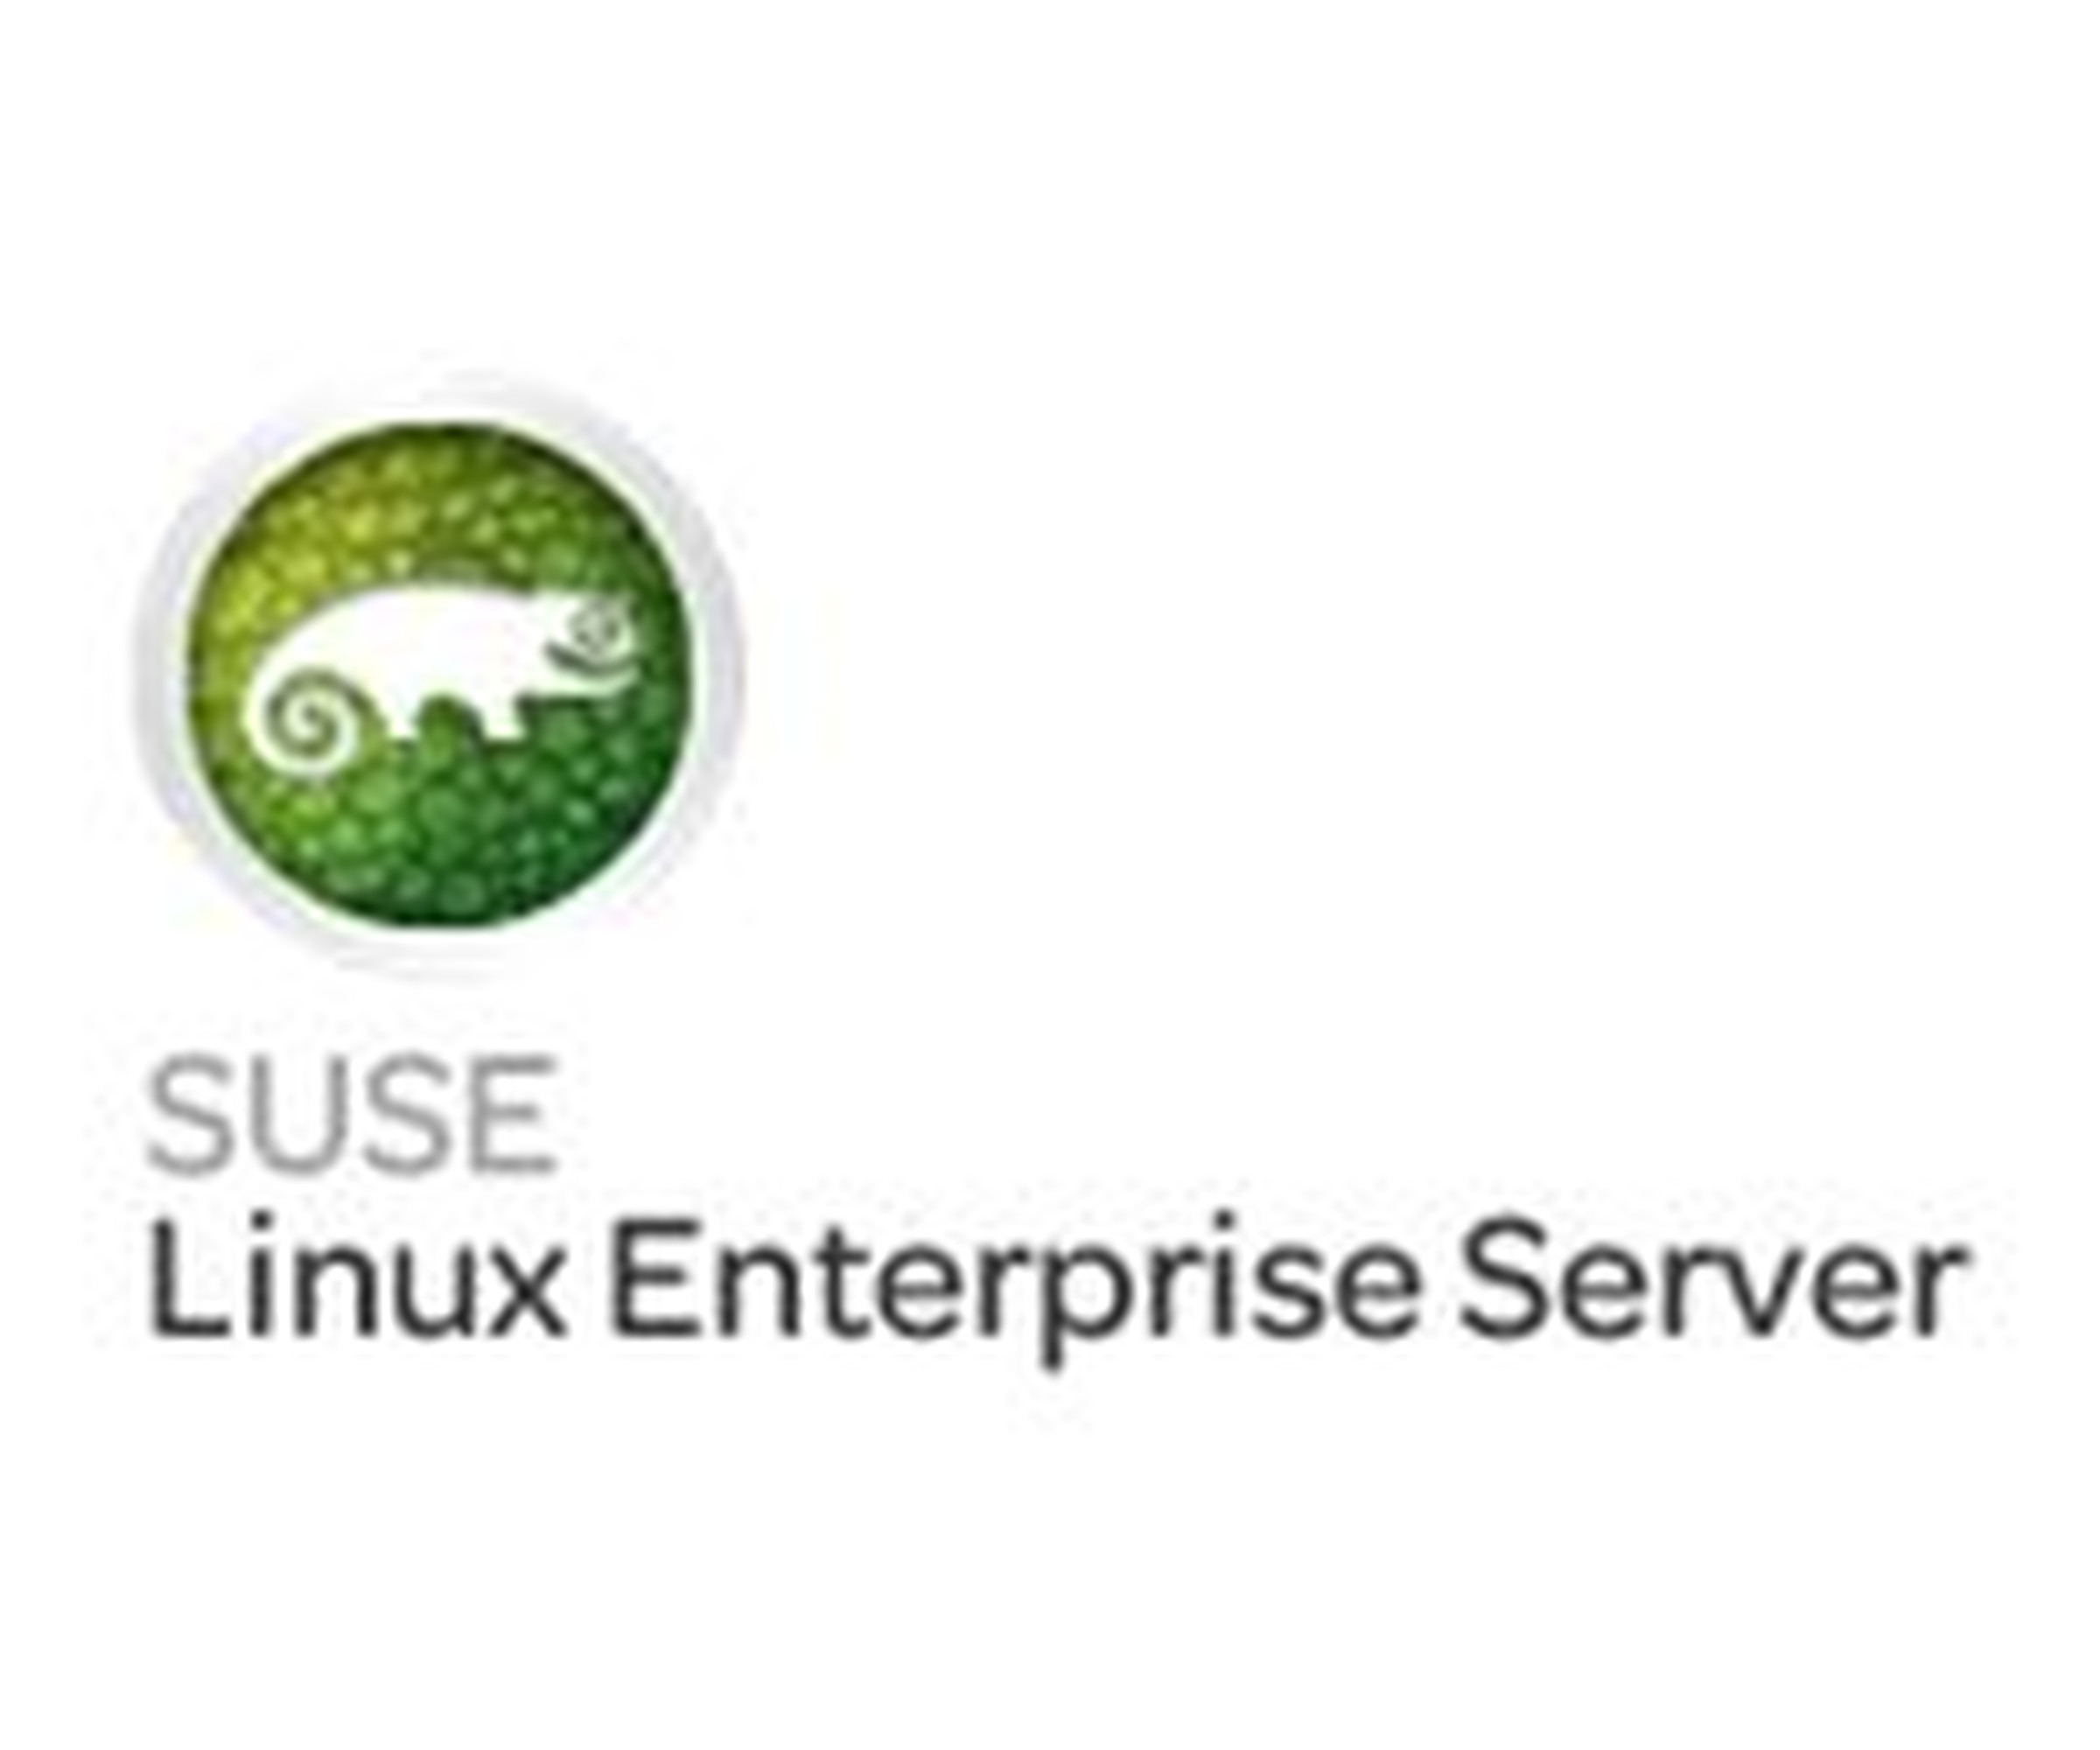 SUSE Linux Enterprise Server (sles). SUSE SCA_sles15 SUSE certified Administrator. Econel логотип.